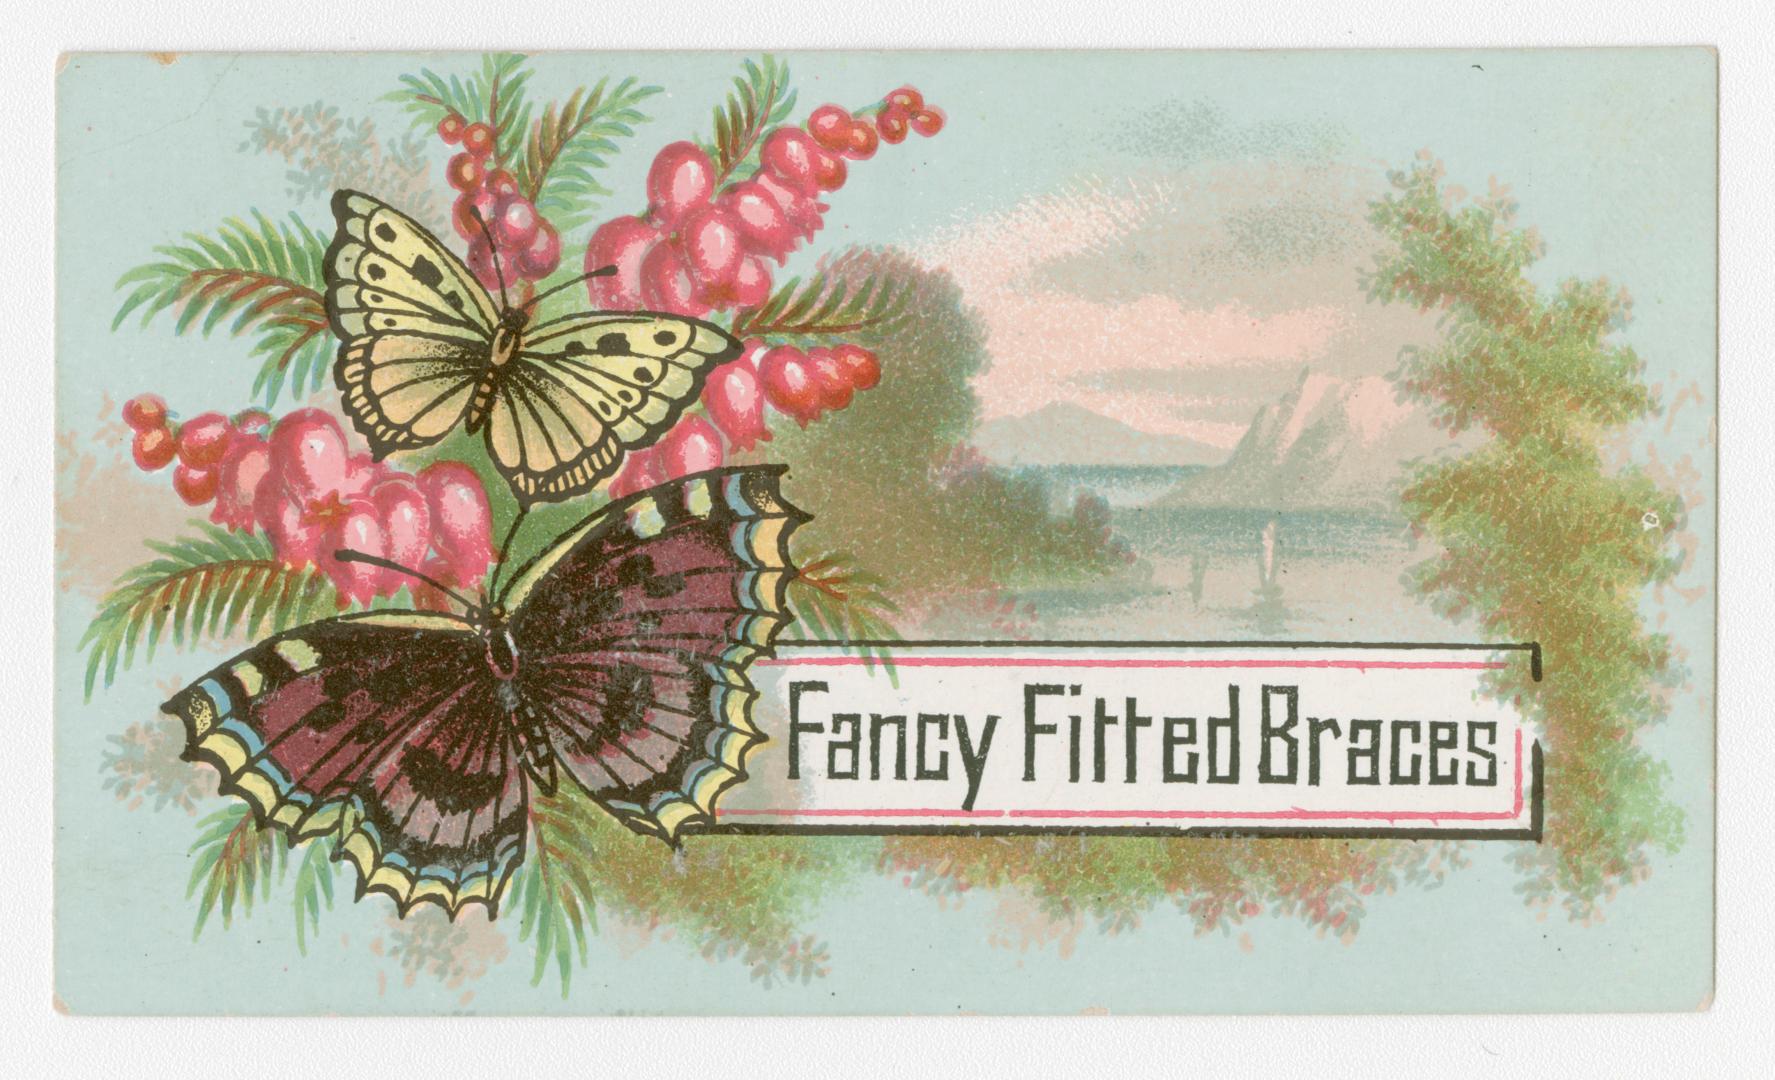 Colour trade card depicting a nature illustration and two butterflies, with text "Fancy Fitted  ...